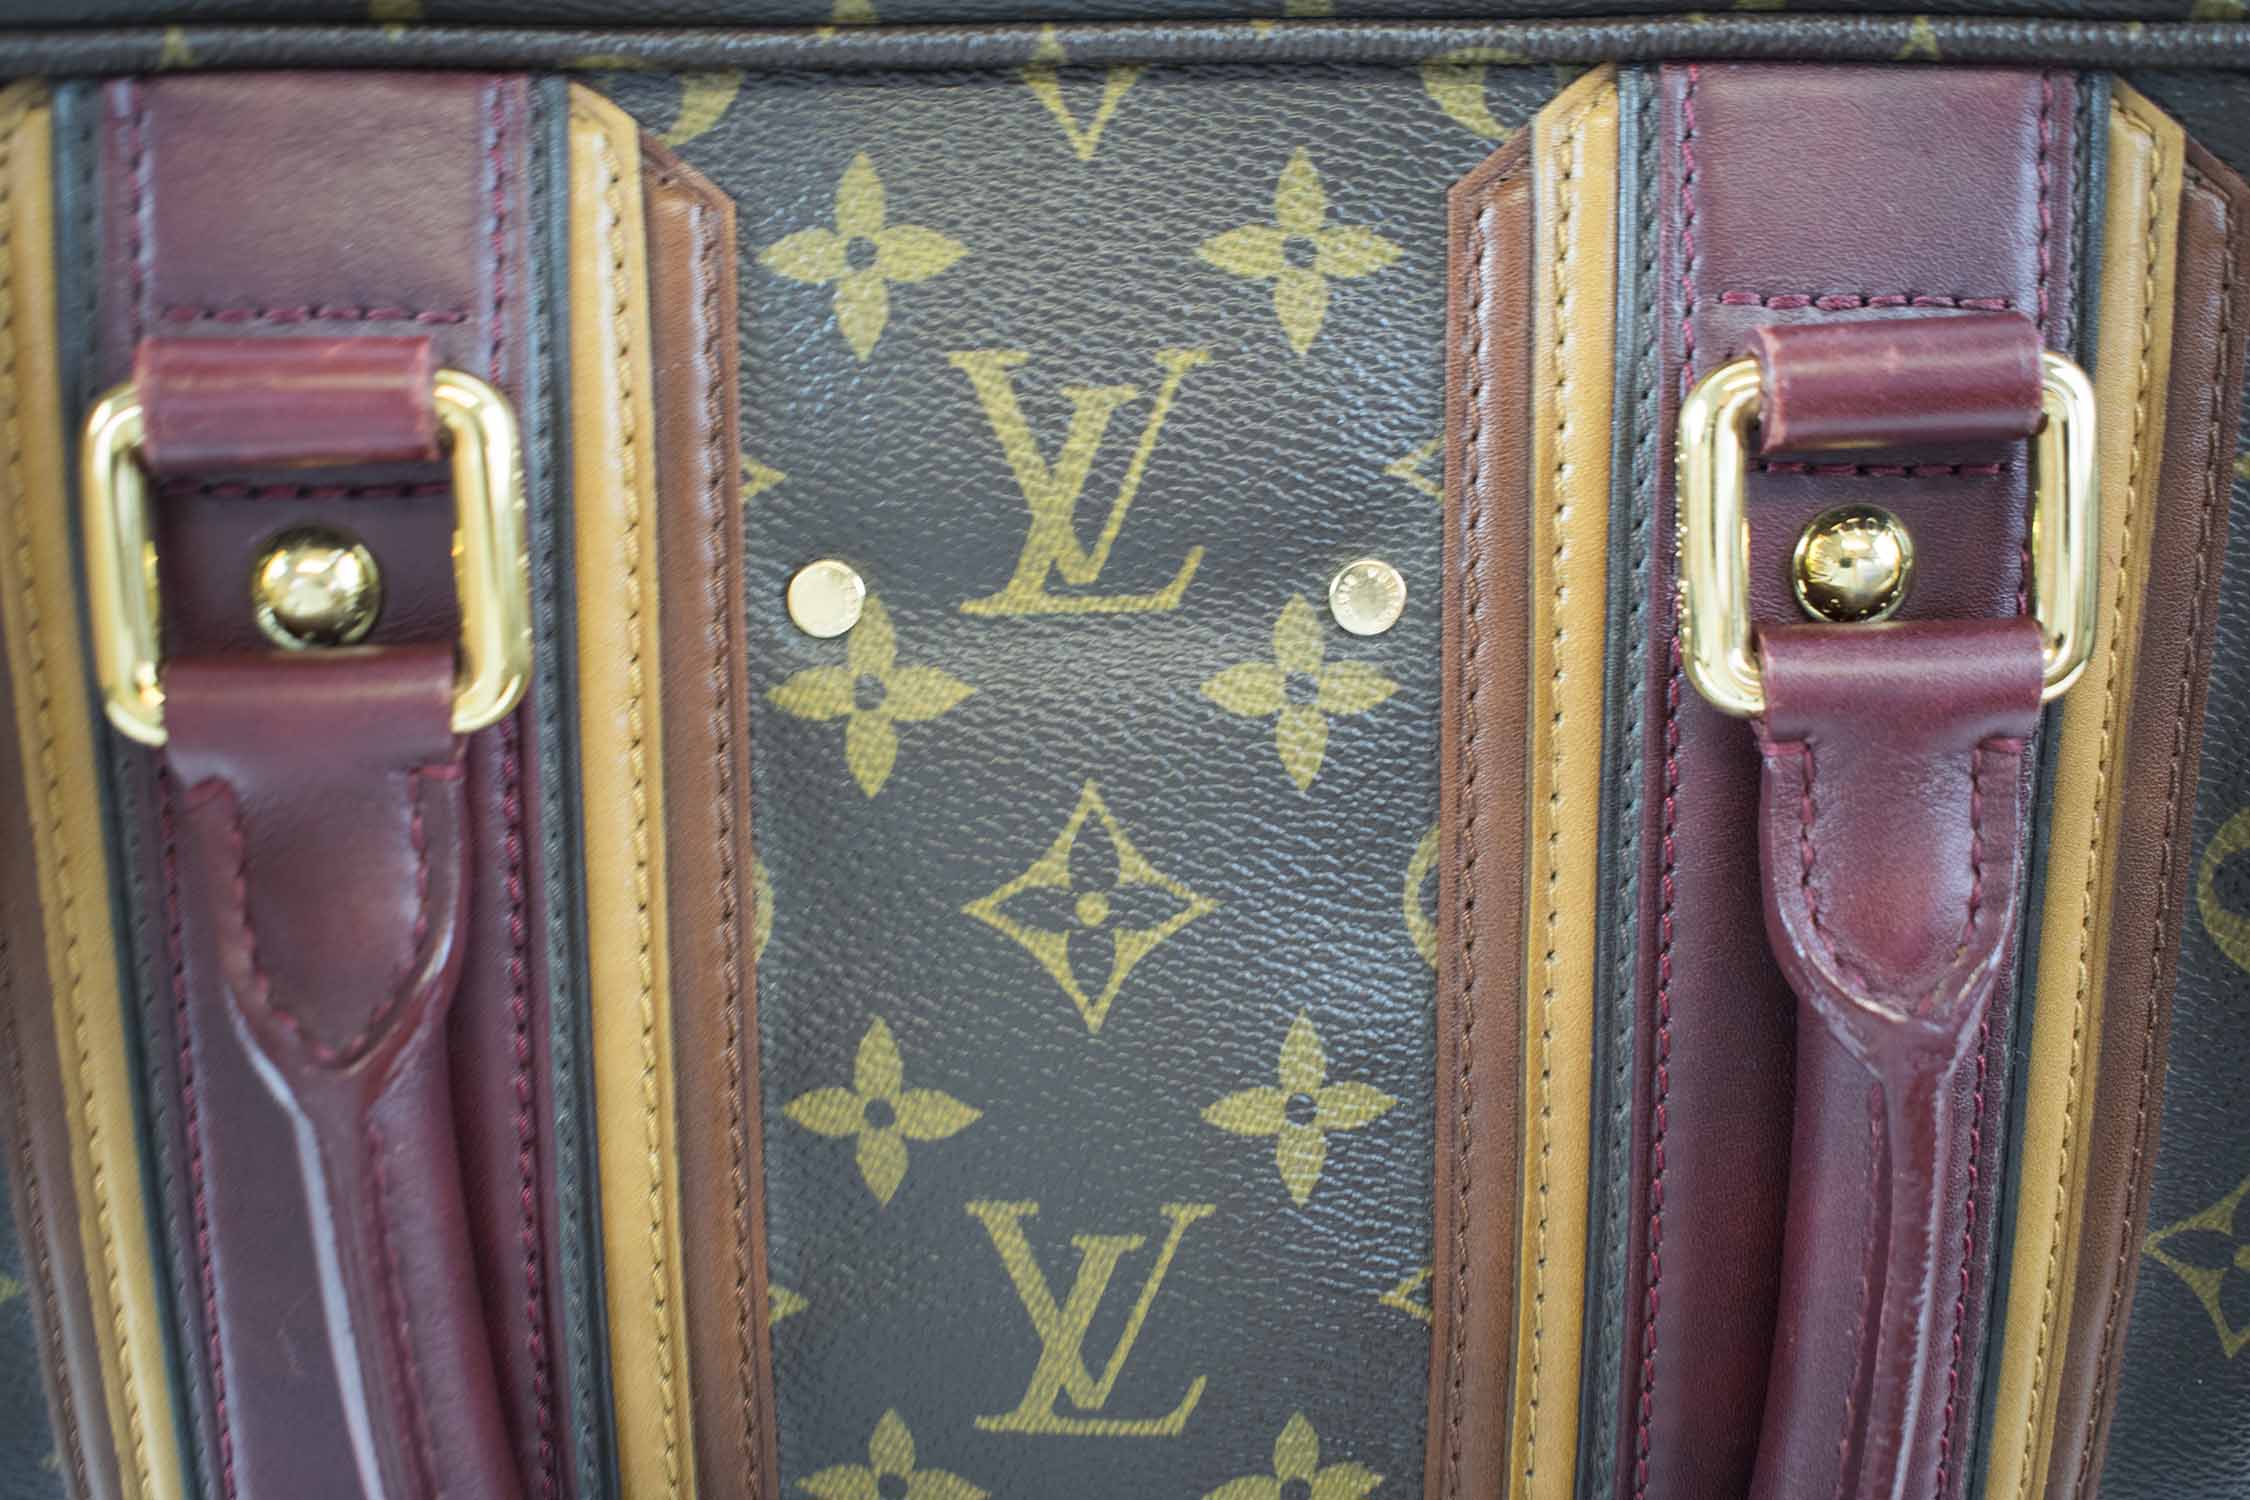 LOUIS VUITTON LTD EDITION MONO TOTE/SHOULDER BAG, monogram canvas, gold tone  hardware, top double zip, two top burgundy leather handles and  adjustable/removable strap with twill fabric lining, with dust bag, 27cm x